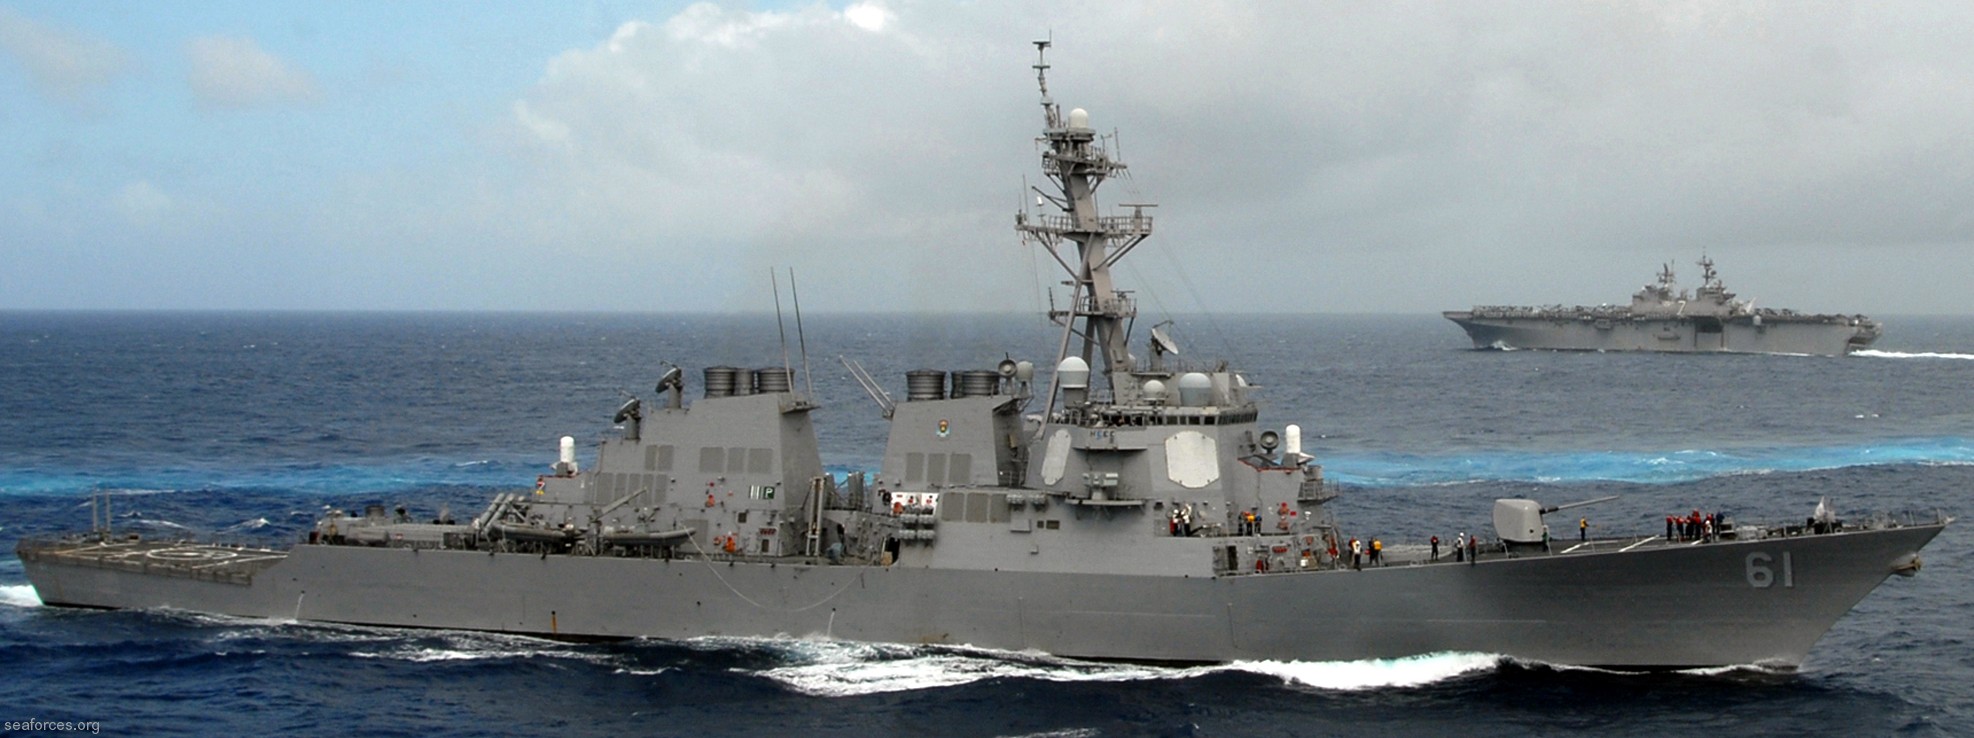 ddg-61 uss ramage guided missile destroyer us navy 48